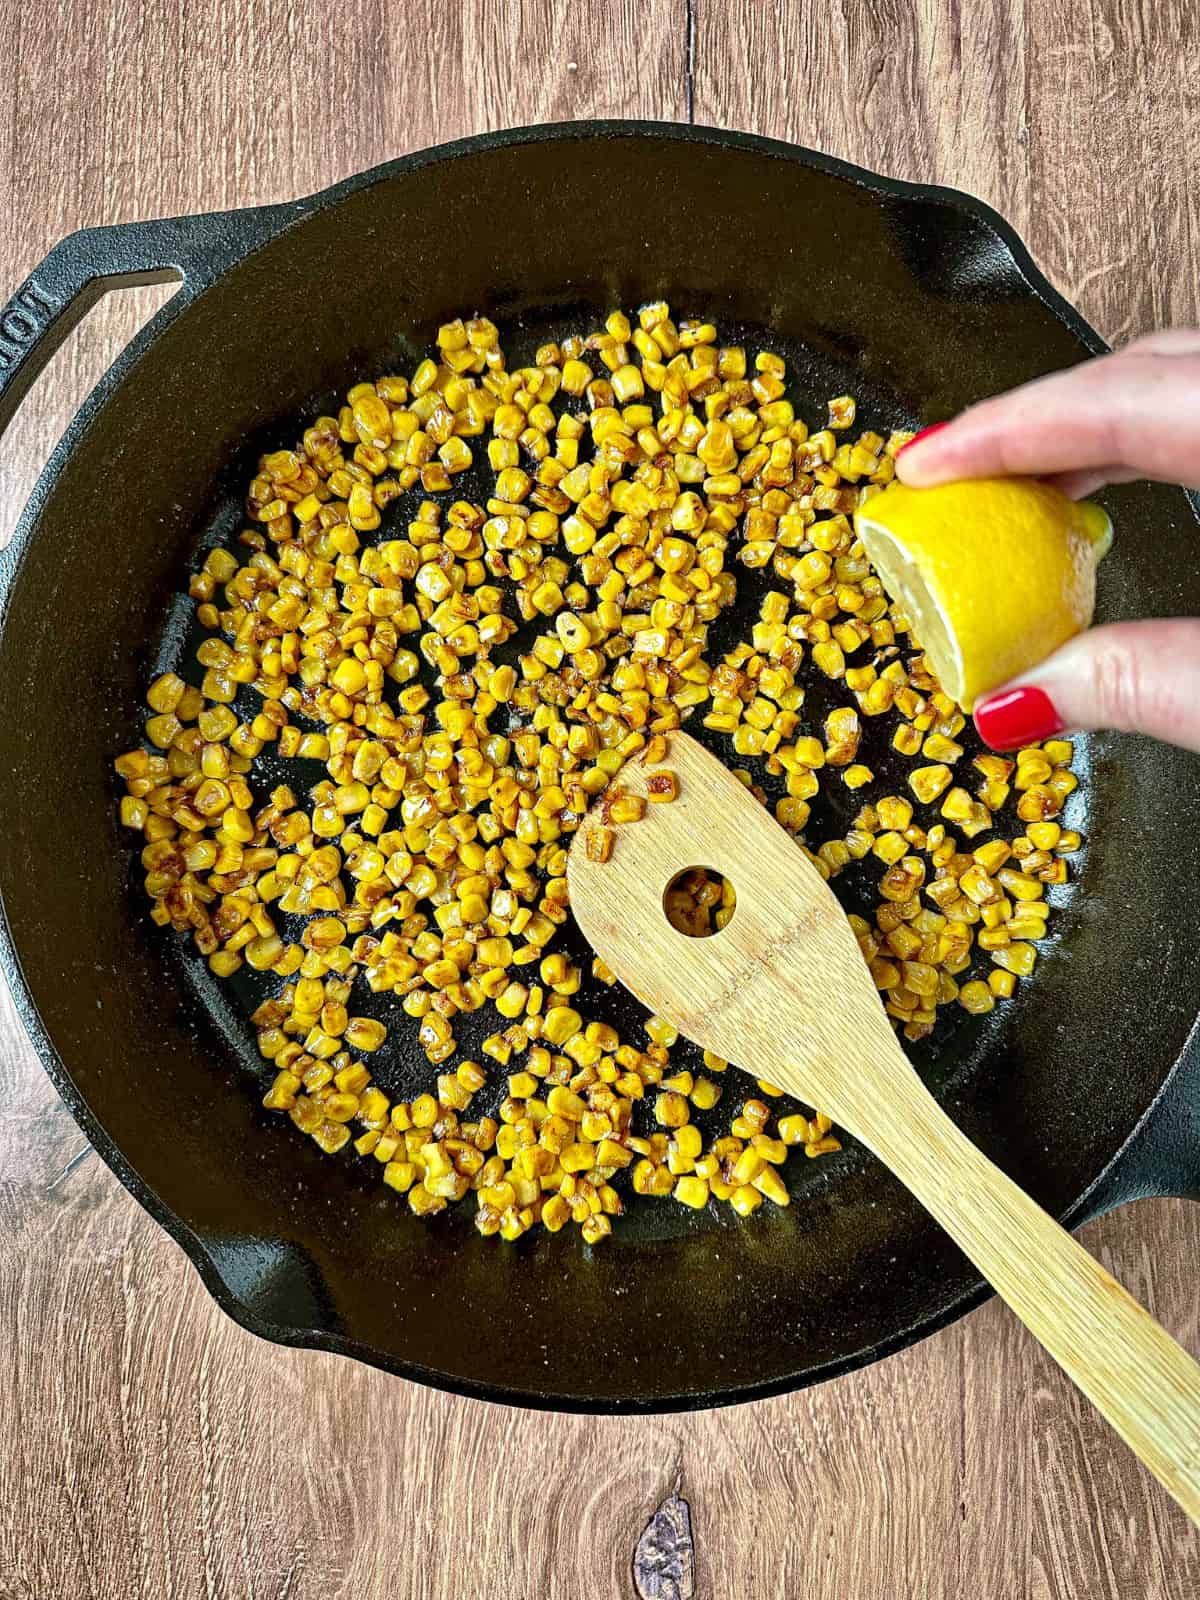 Hand squeezing a lemon in skillet with blackened corn and a wooden spoon.